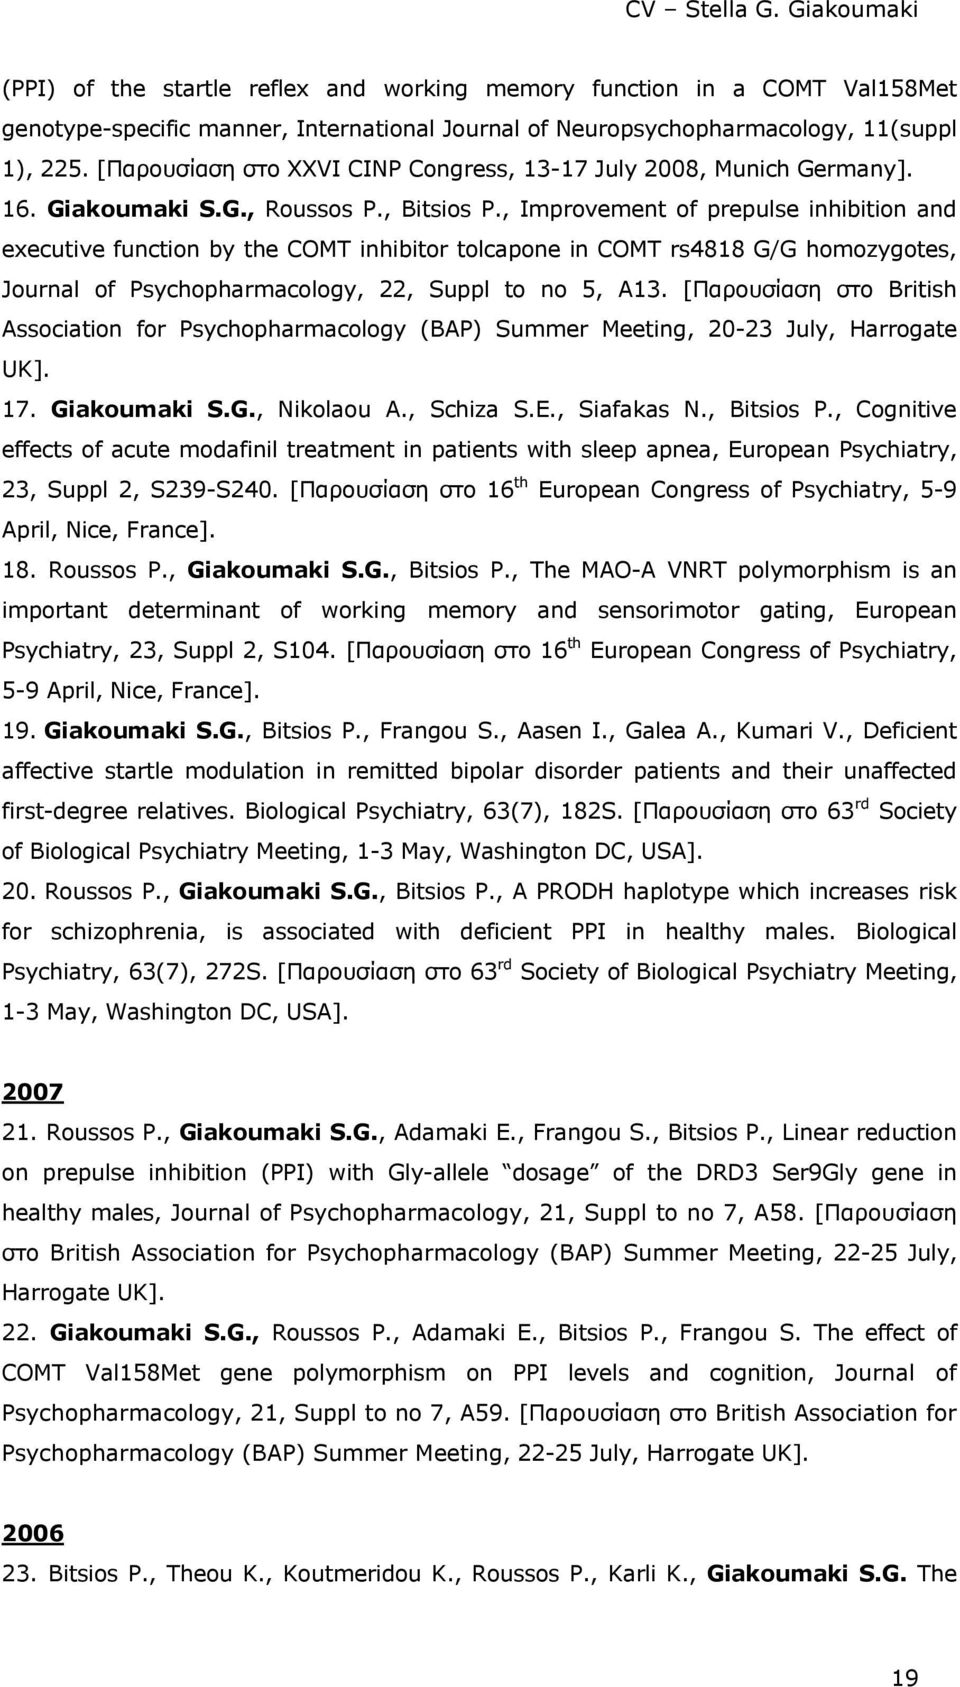 , Improvement of prepulse inhibition and executive function by the COMT inhibitor tolcapone in COMT rs4818 G/G homozygotes, Journal of Psychopharmacology, 22, Suppl to no 5, A13.